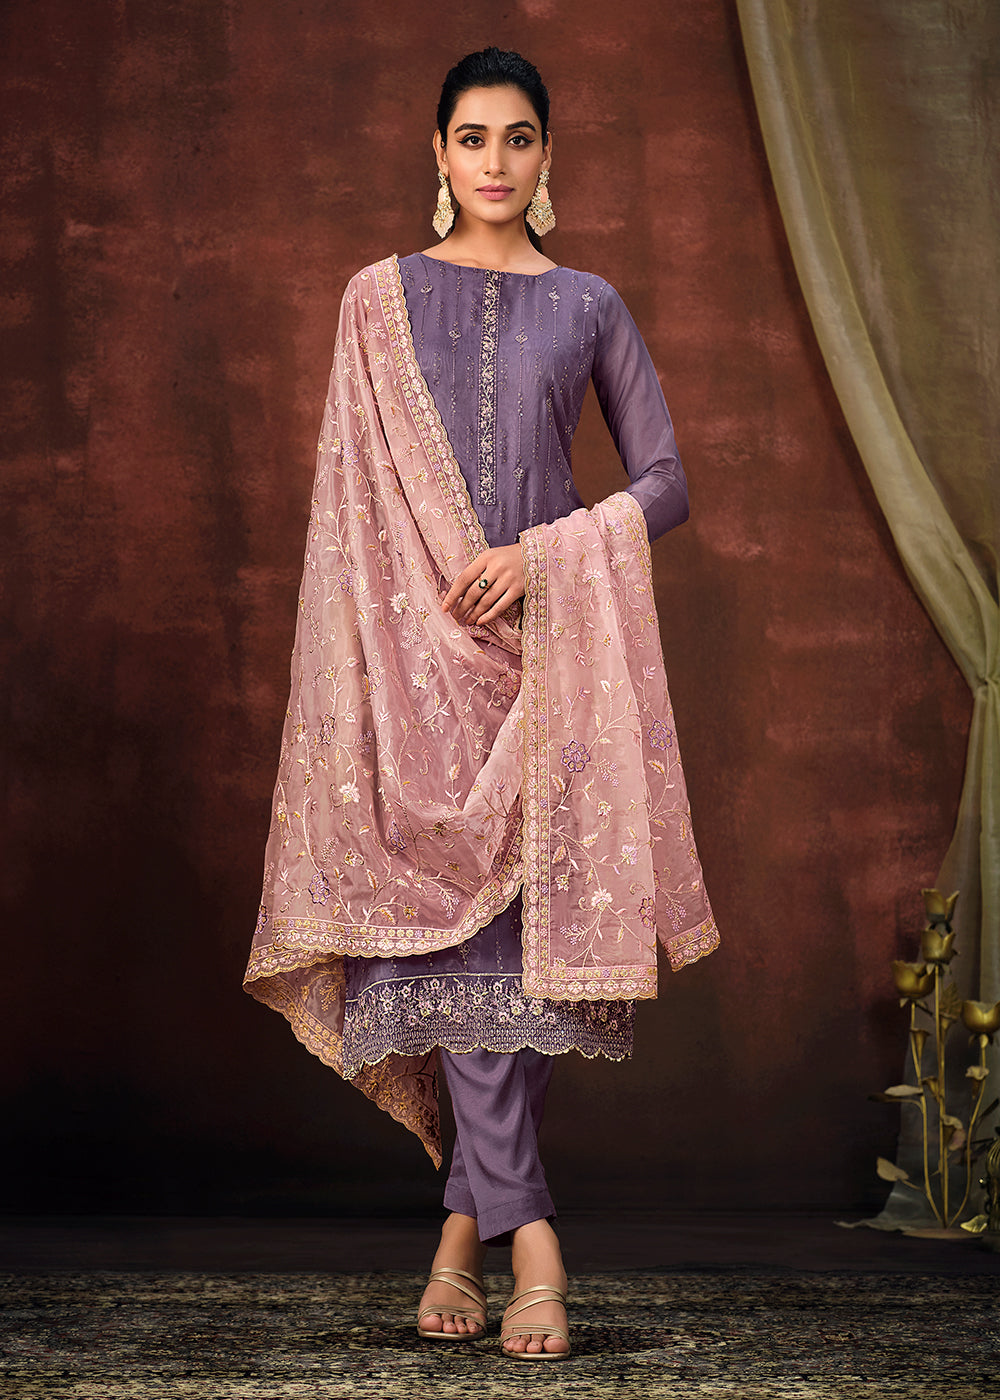 Buy Now Pale Purple Shimmer Organza Embroidered Salwar Suit Online in USA, UK, Canada, Germany, Australia & Worldwide at Empress Clothing. 